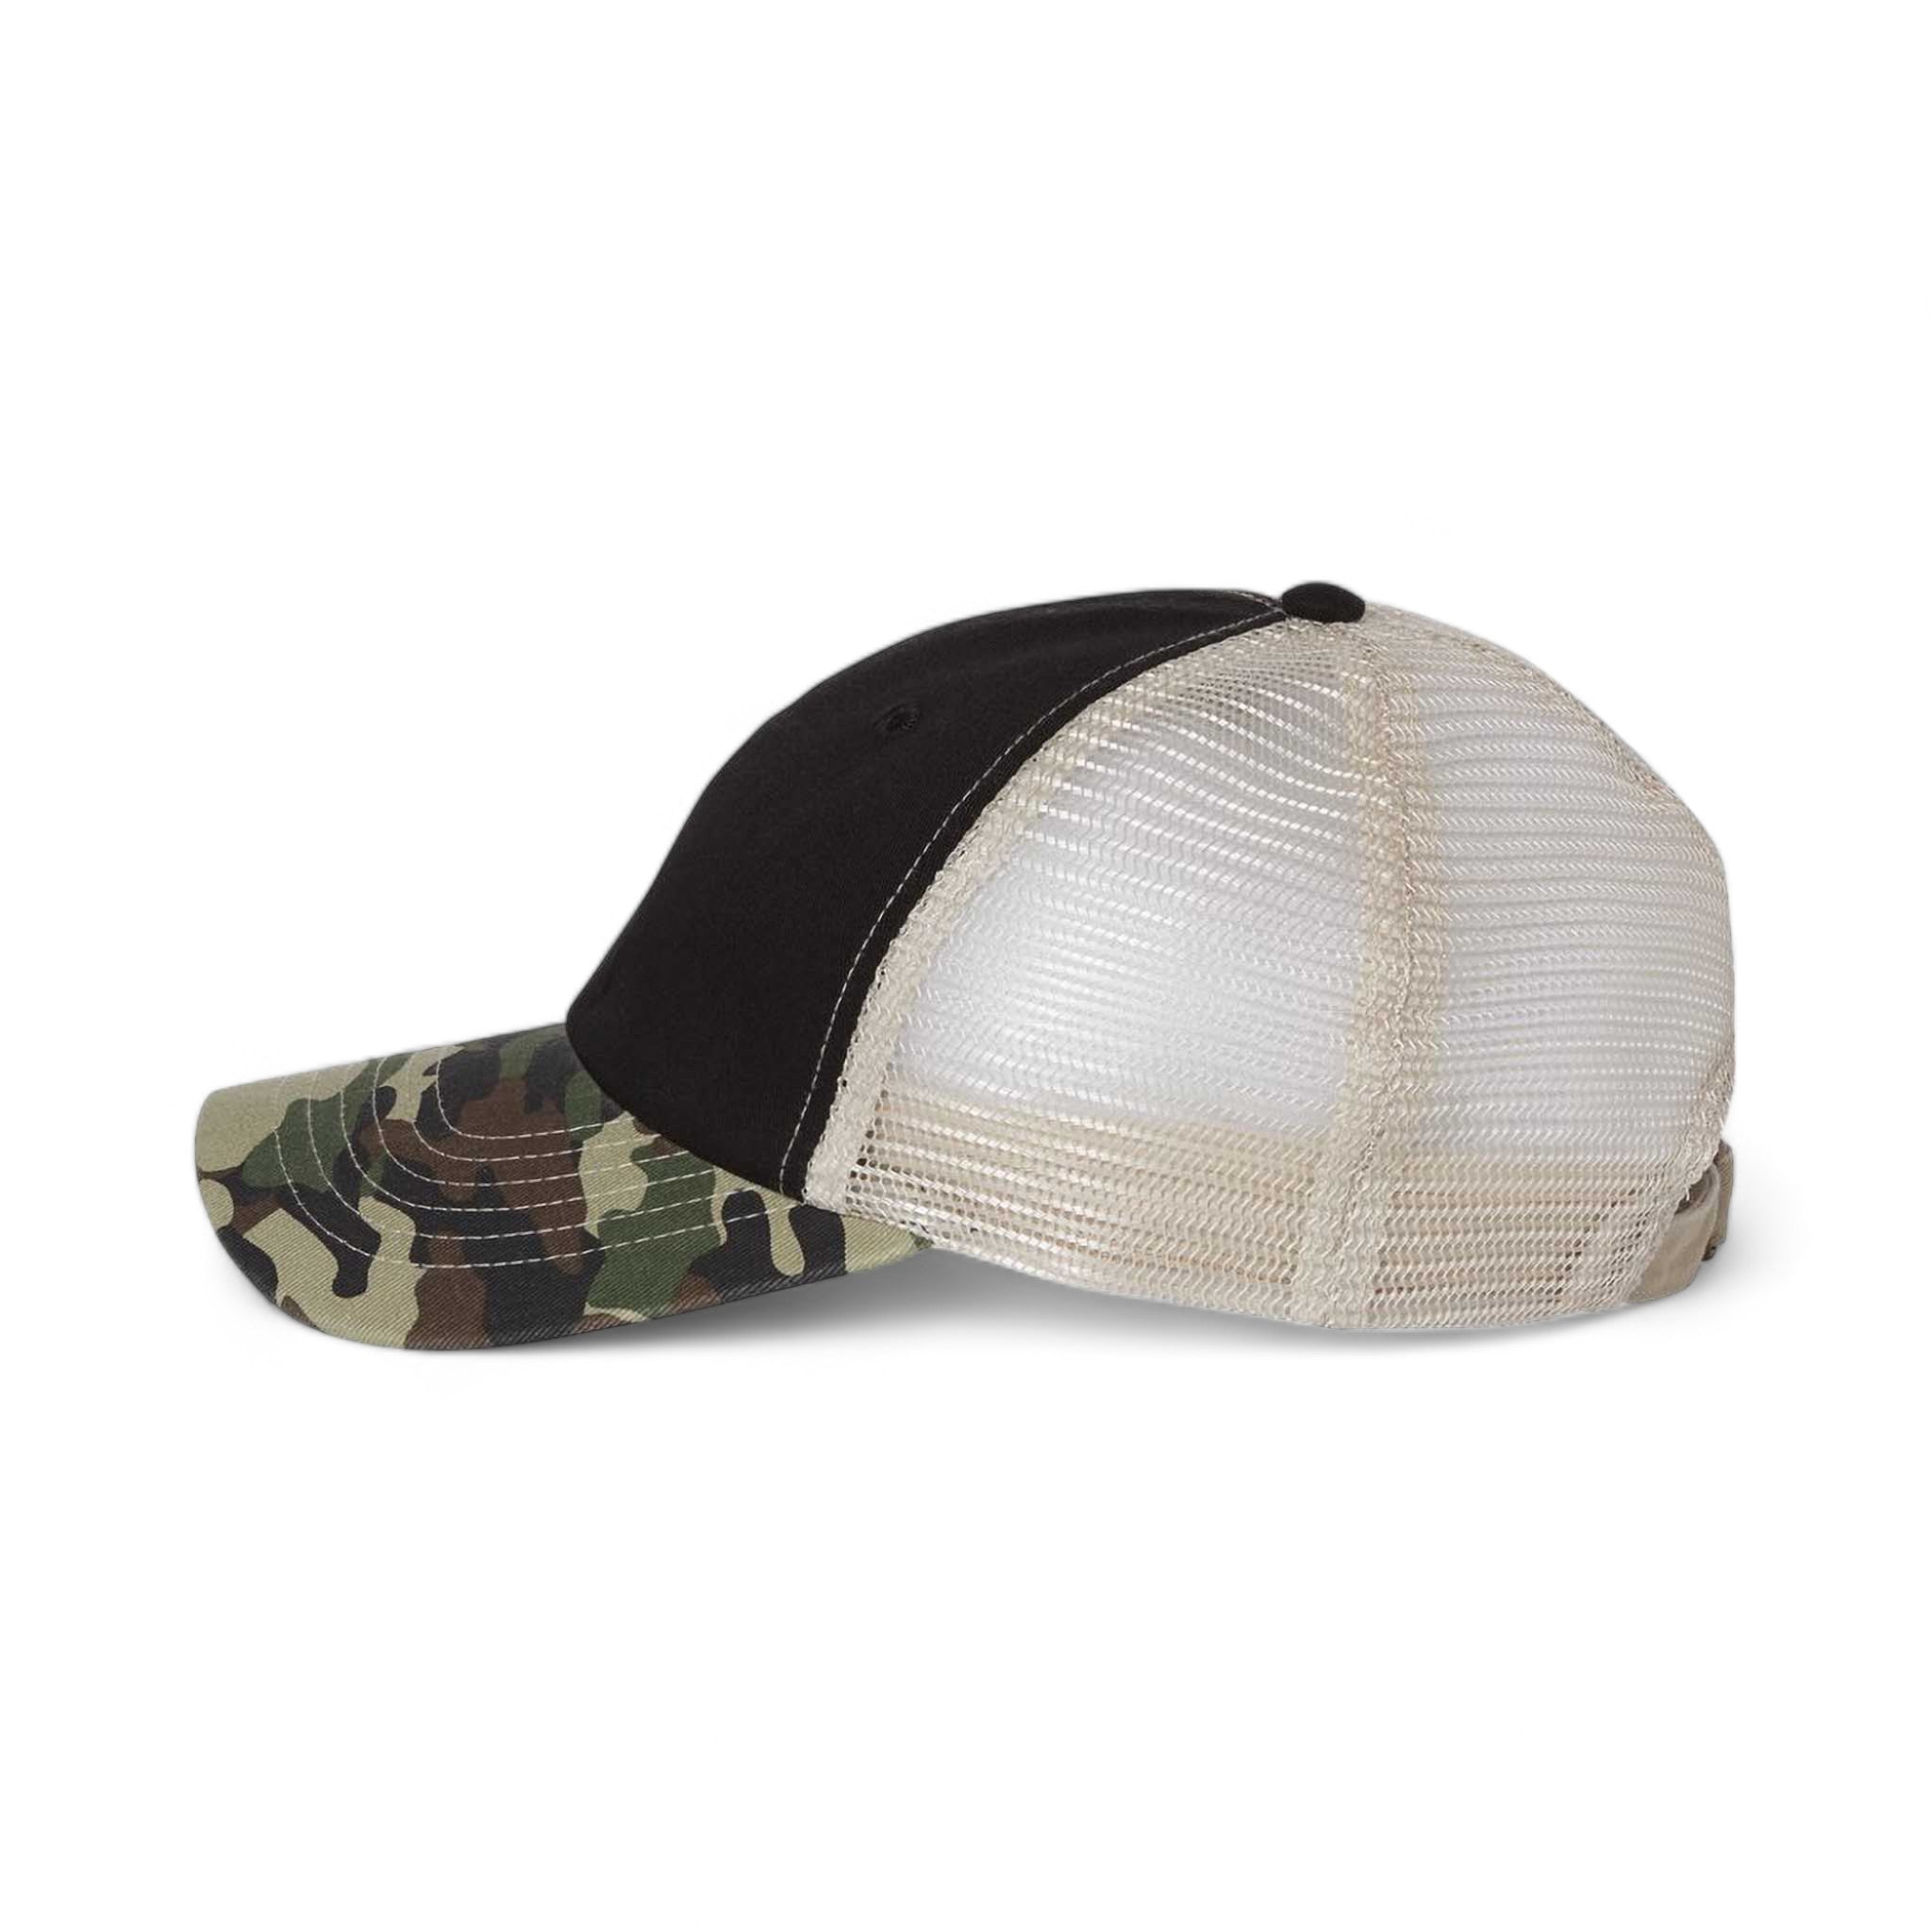 Side view of Sportsman 3100 custom hat in black, camo and stone